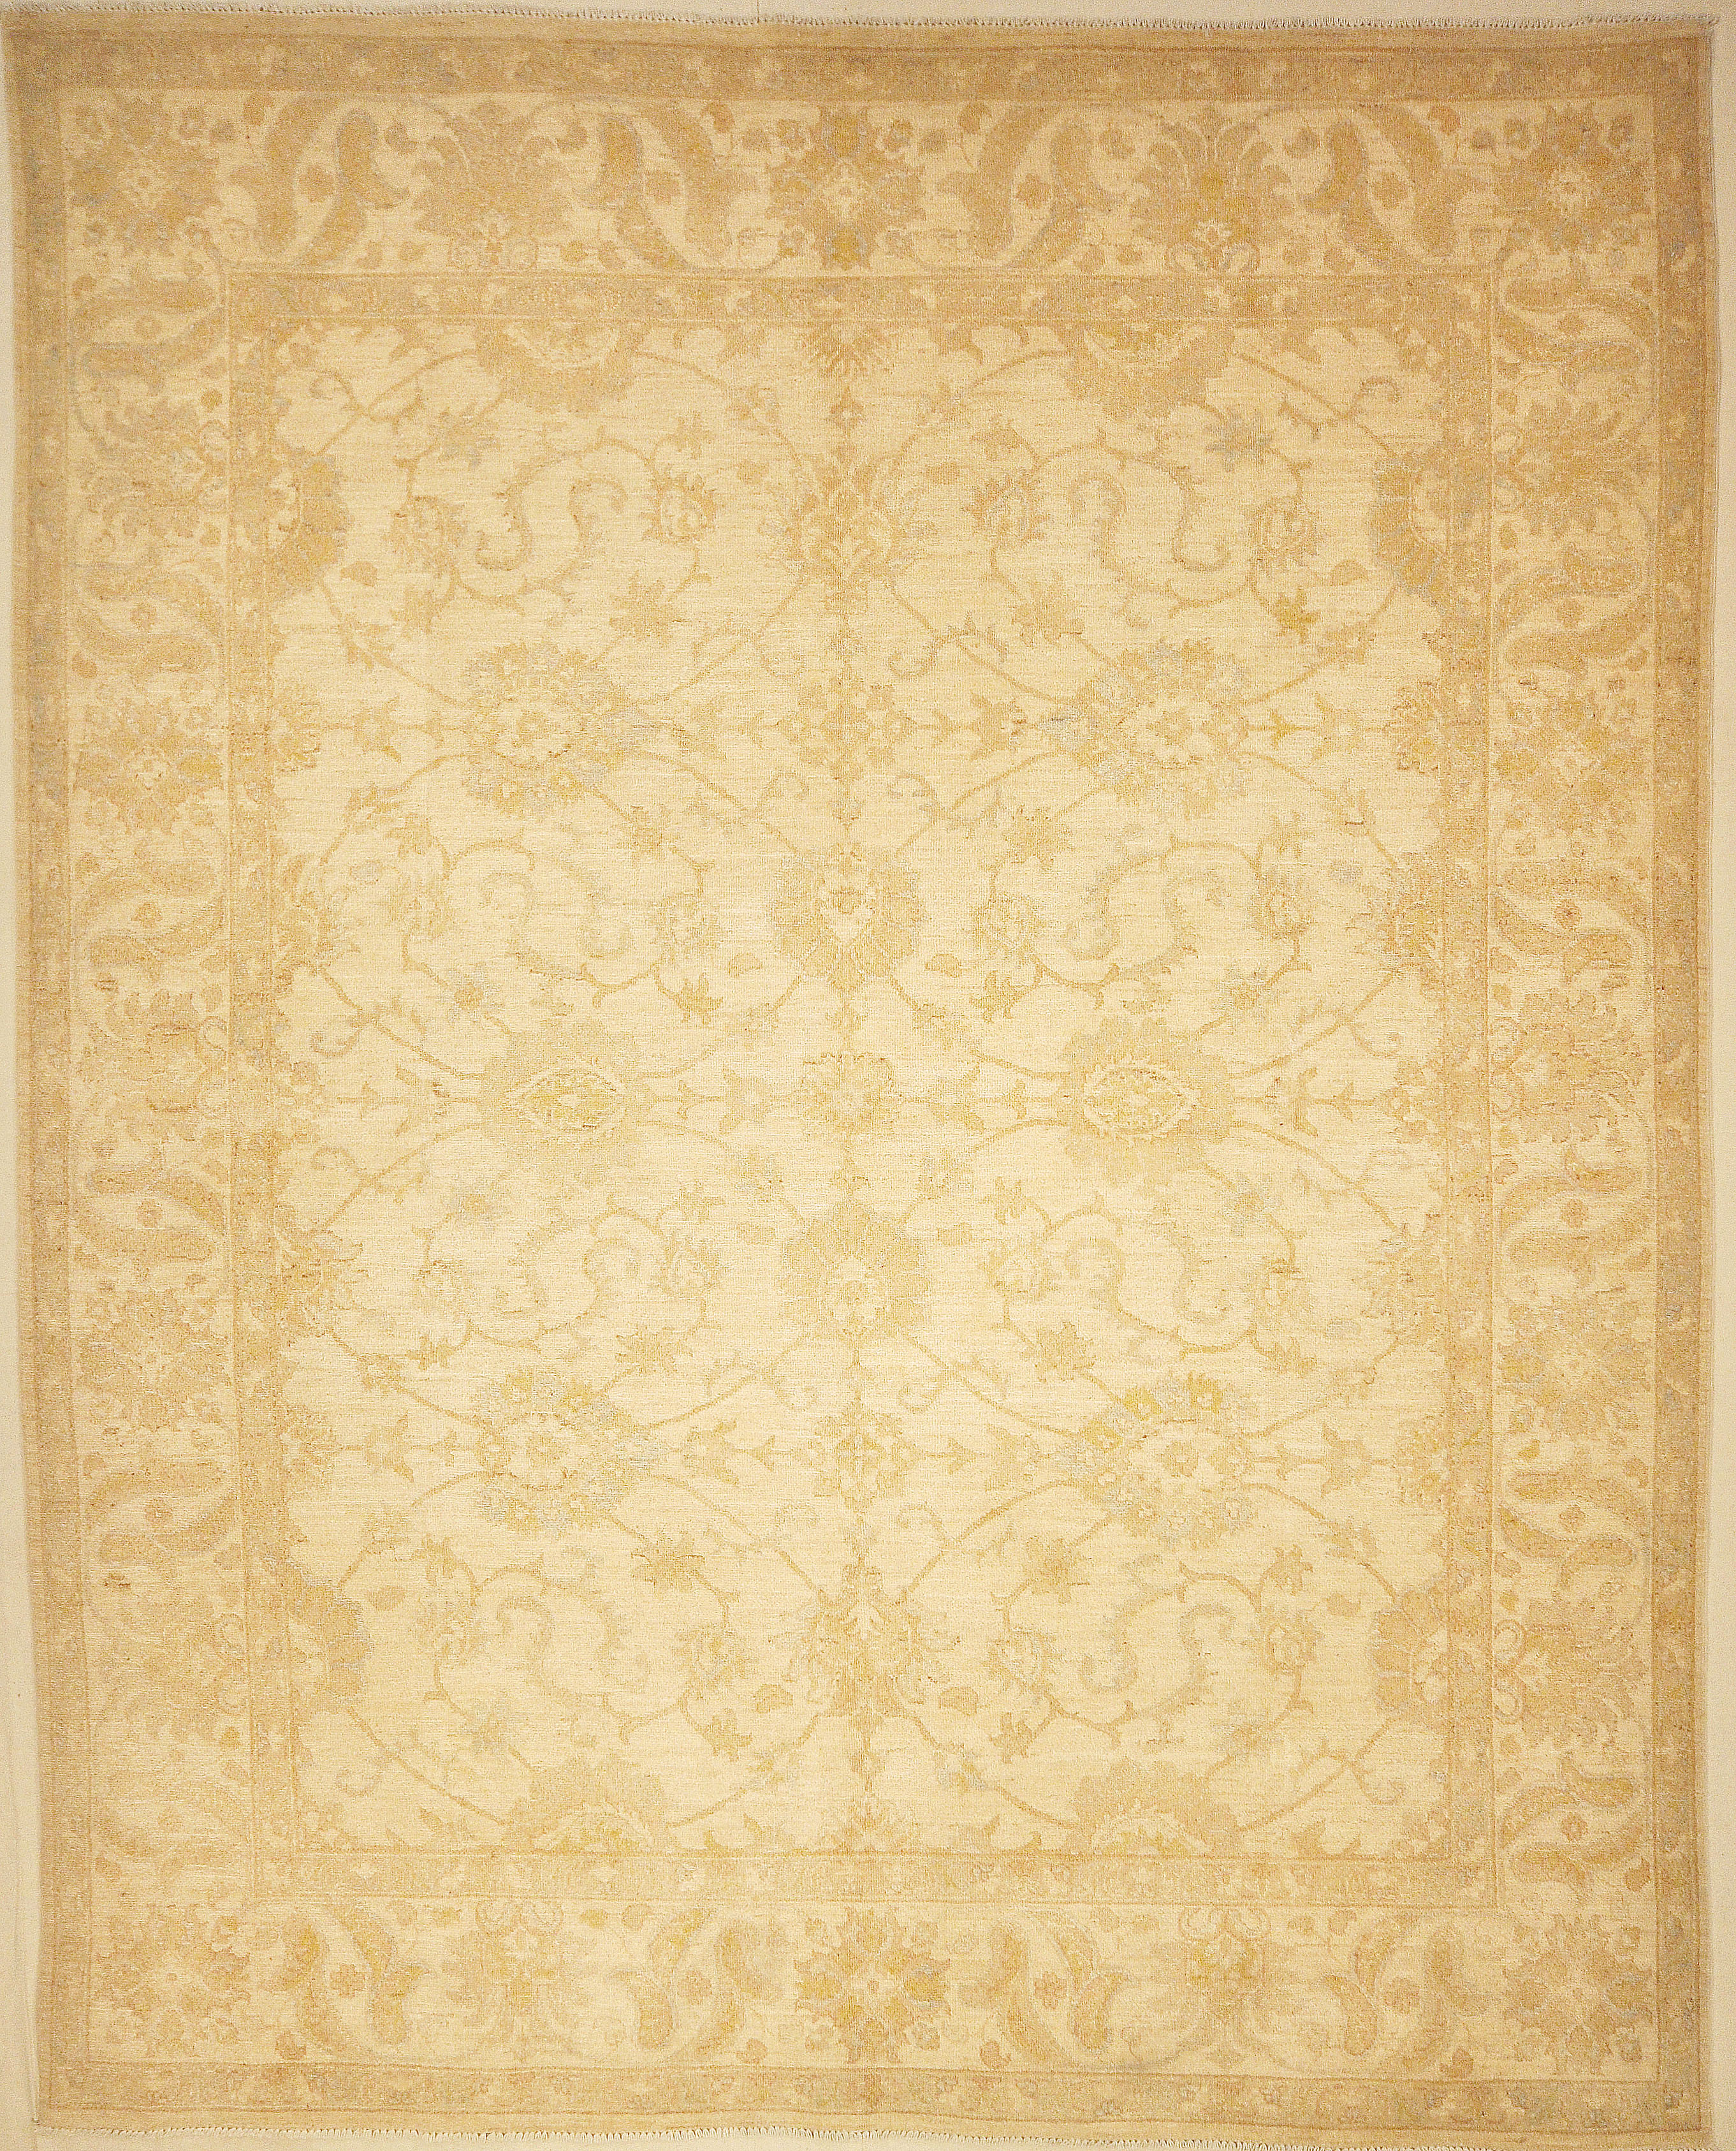 Finest Ziegler Oushak 30285. A piece of genuine authentic woven carpet art sold by the Santa Barbara Design Center, Rugs and More.